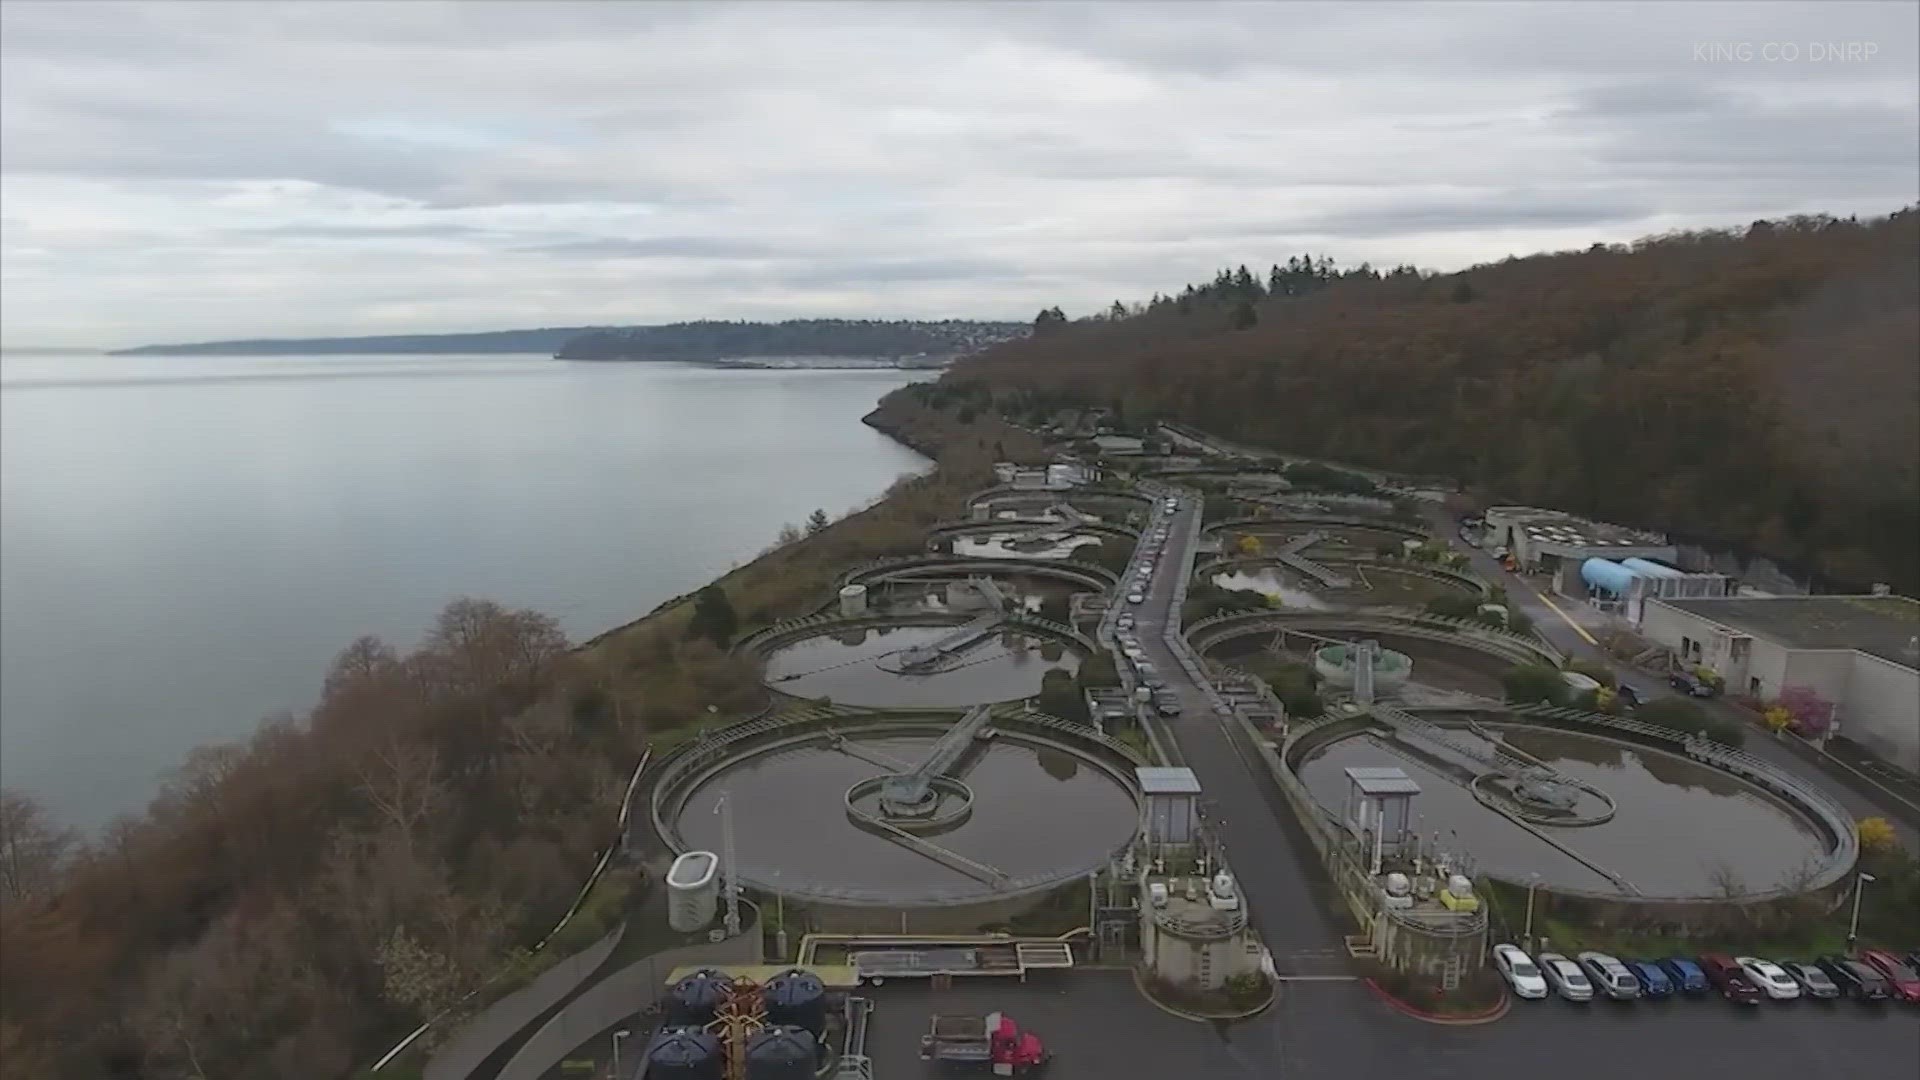 The work is meant to protect water quality in Puget Sound.